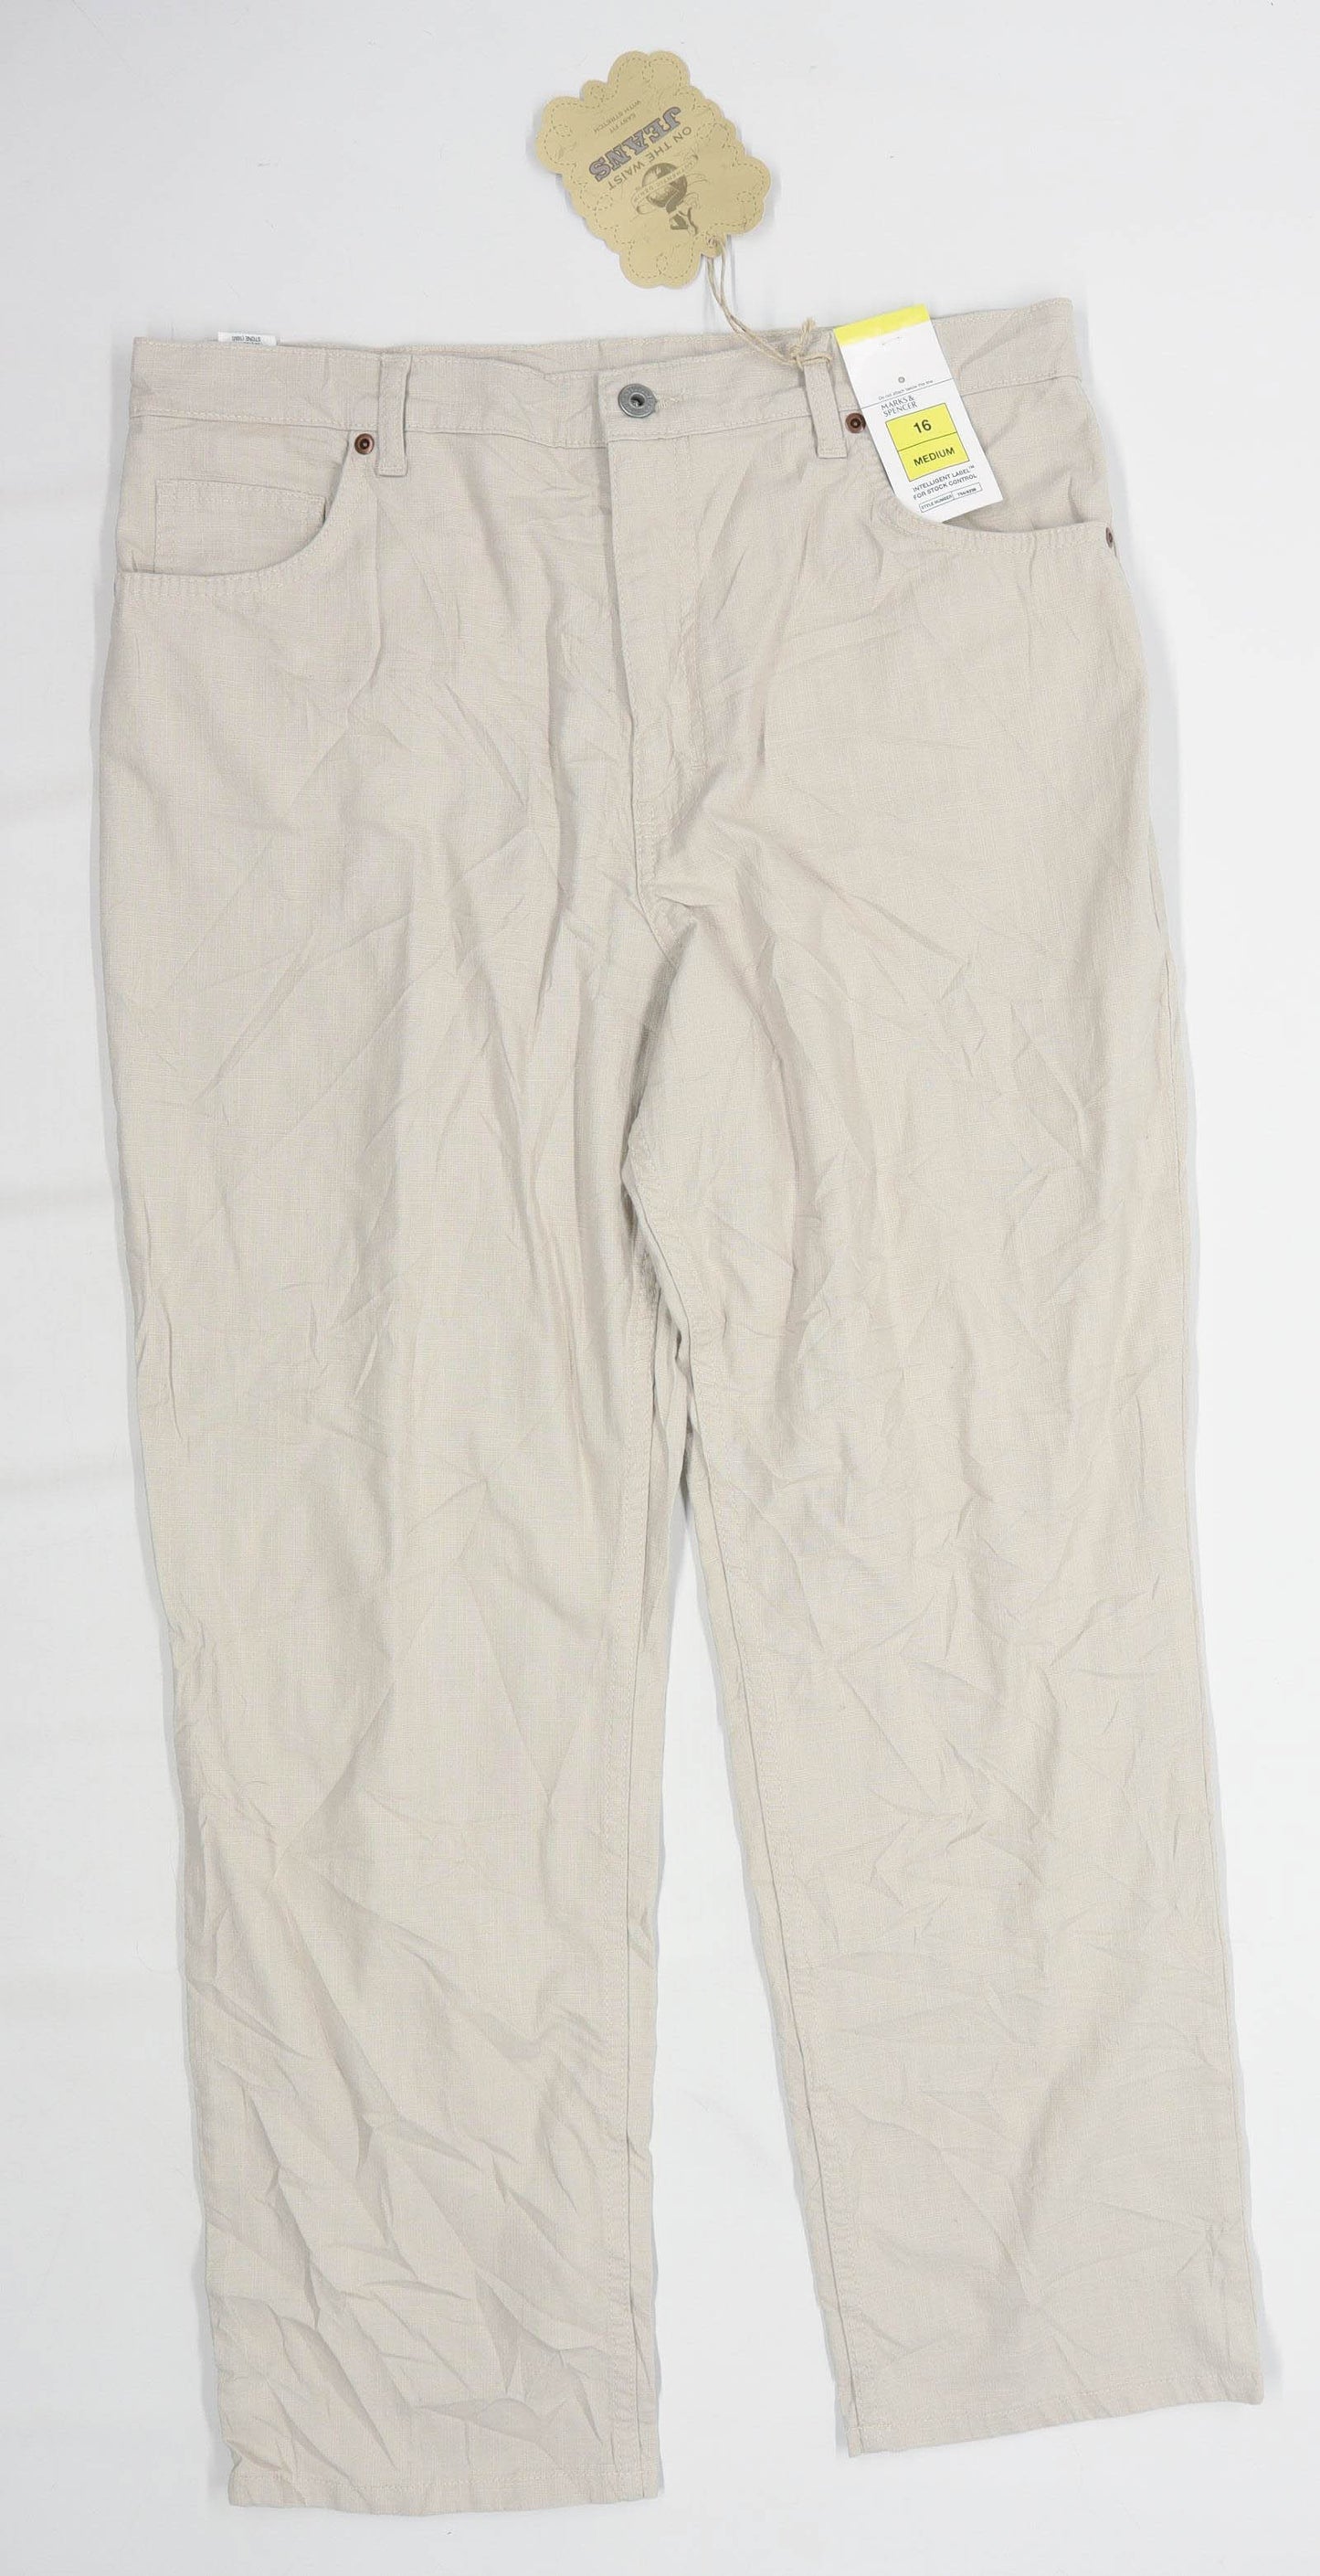 Womens Marks & Spencer Beige Cotton Jeans Size 16/L28